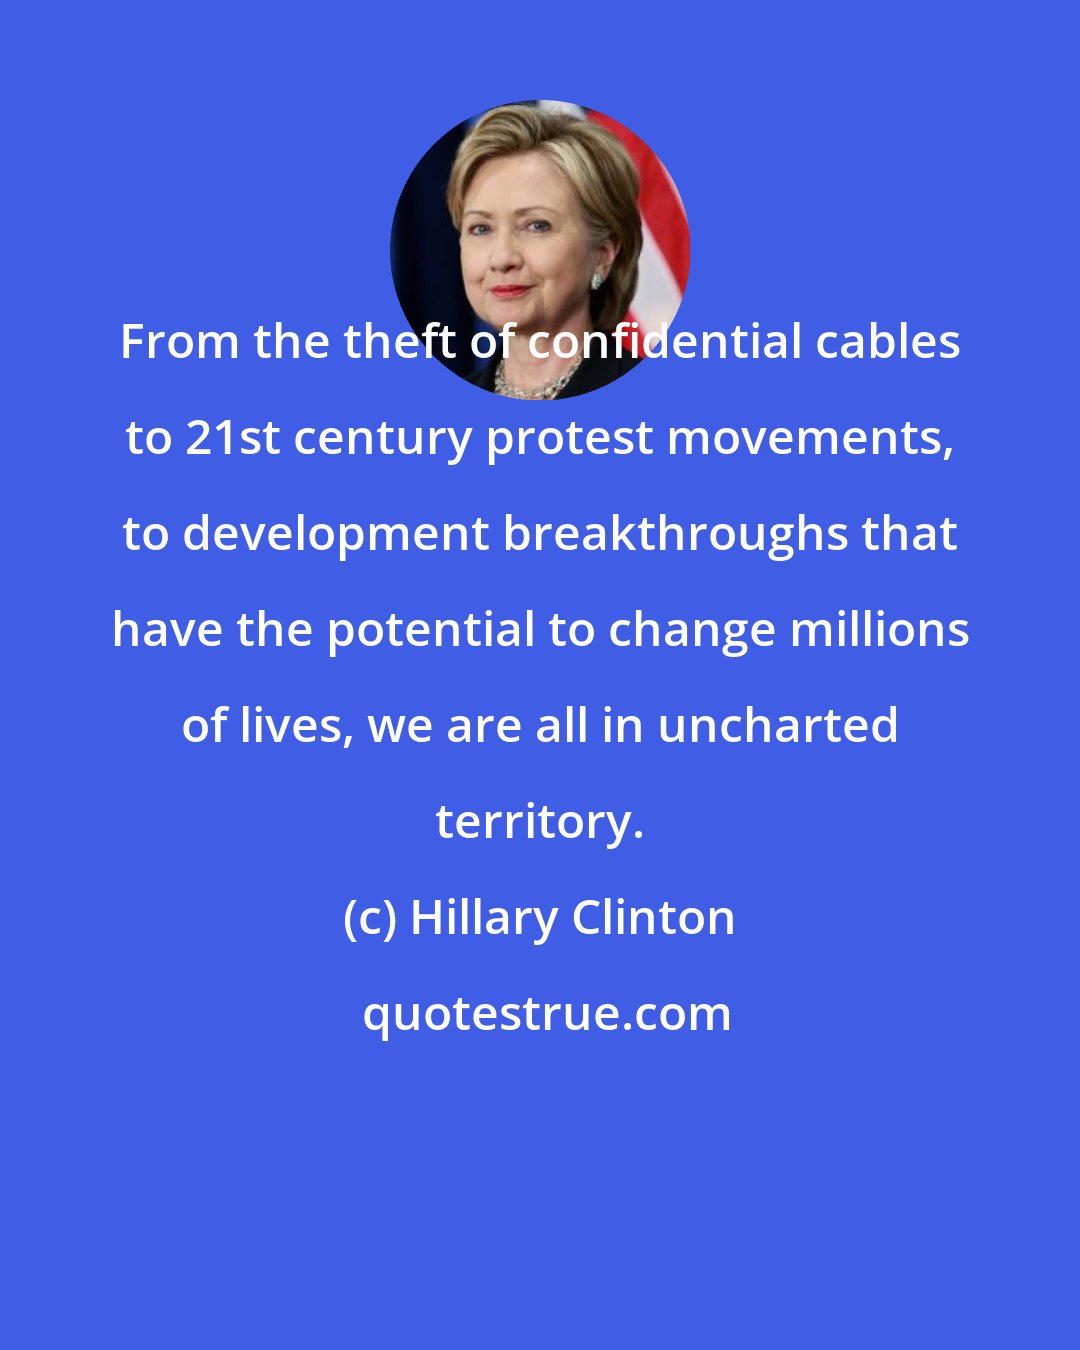 Hillary Clinton: From the theft of confidential cables to 21st century protest movements, to development breakthroughs that have the potential to change millions of lives, we are all in uncharted territory.